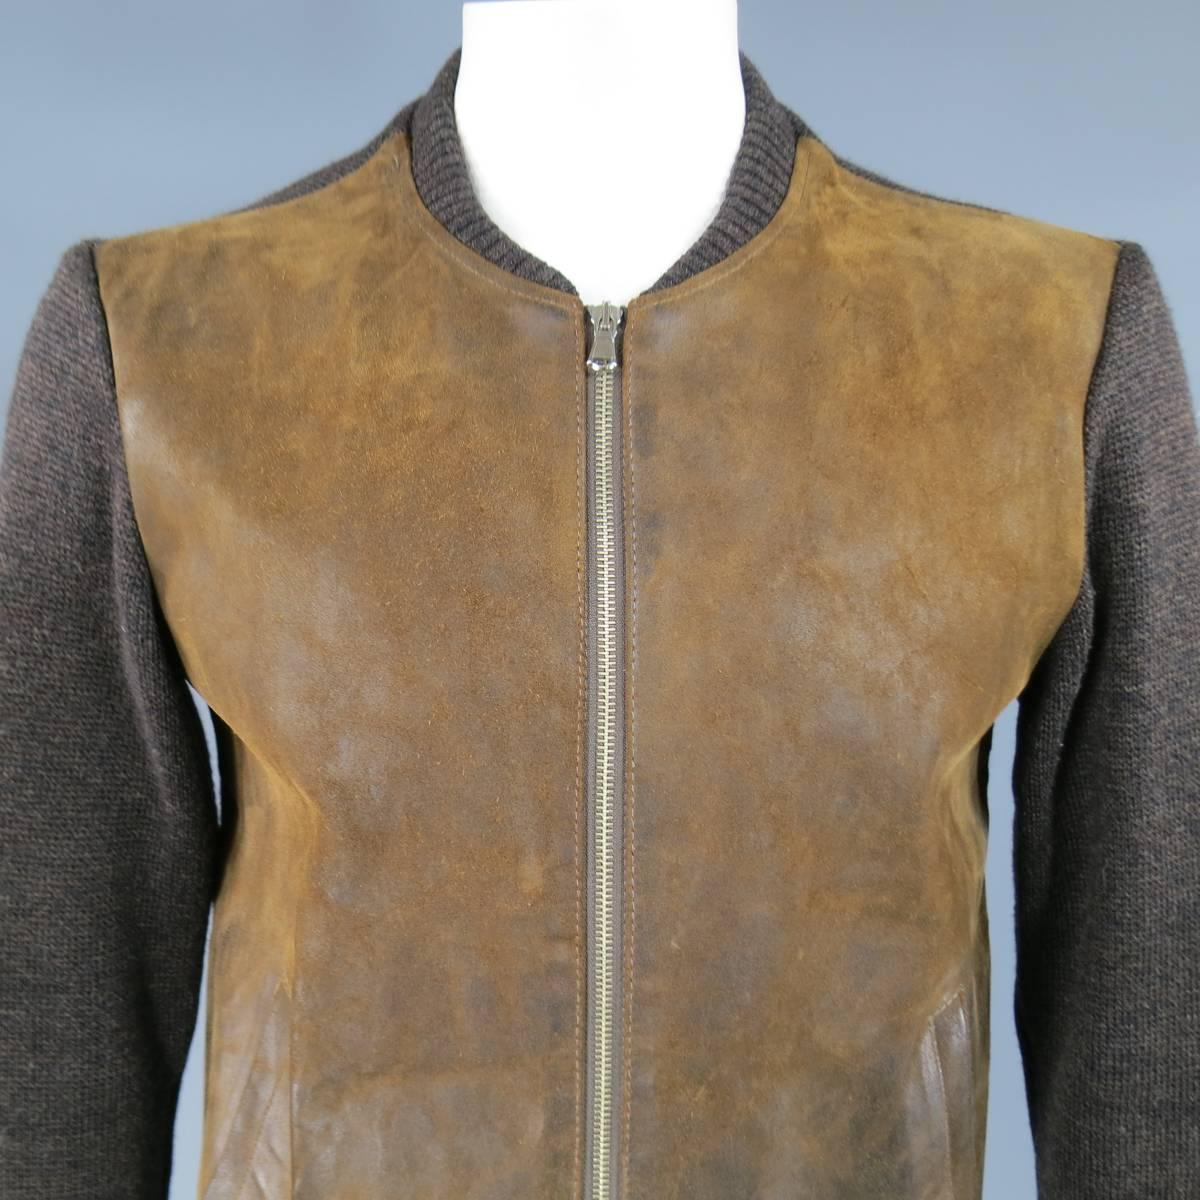 MAISON MARTIN MARGIELA bomber jacket in a thick Heather textured brown wool knit featuring a distressed tan leather zip up front, ribbed baseball collar, slanted pockets, and tan suede elbow patches.  Made in Italy.
 
Excellent Pre-Owned